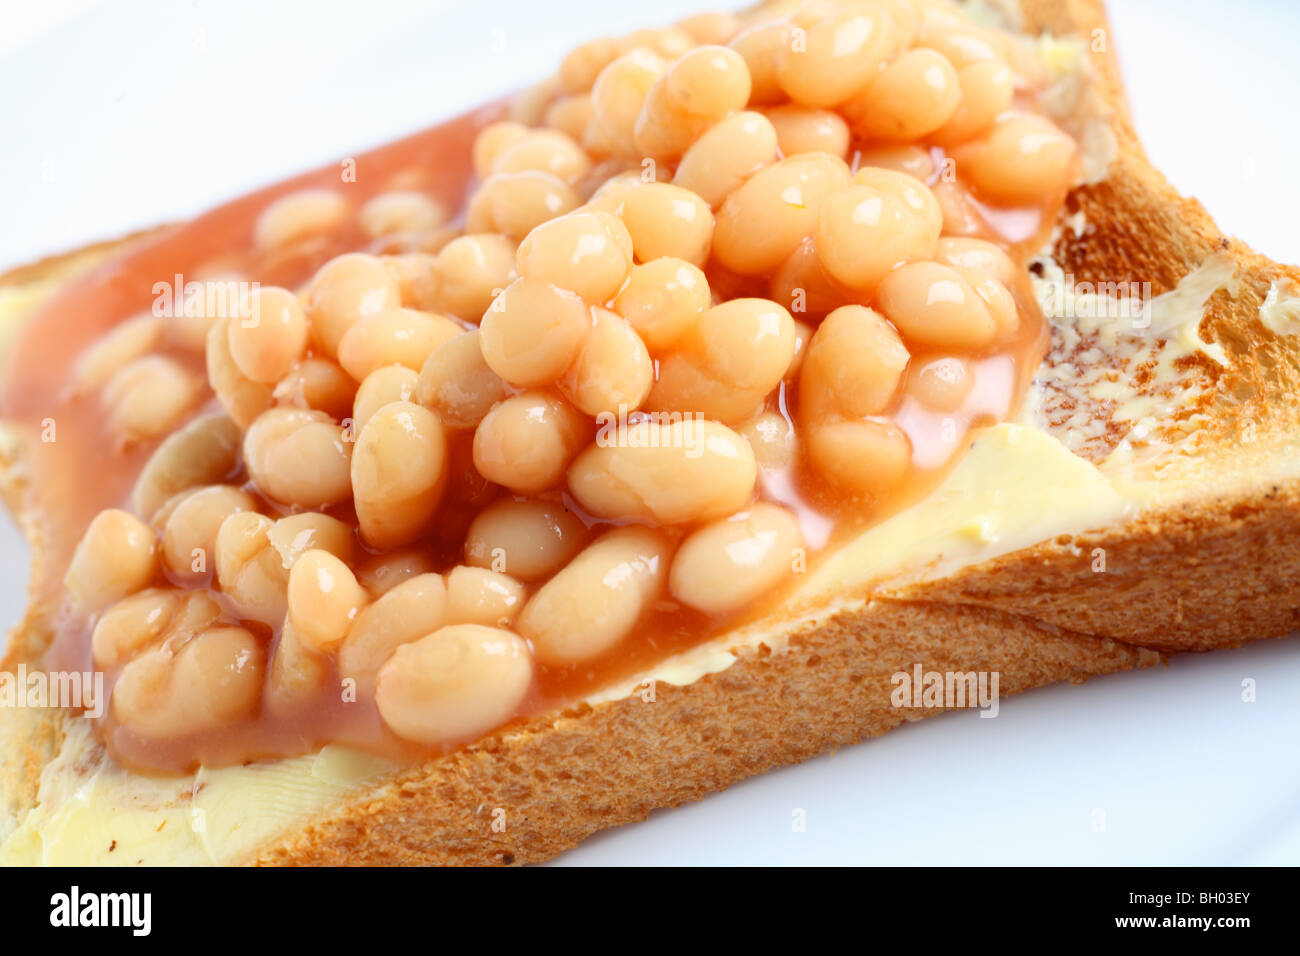 A plate with baked beans on toast seen close-up Stock Photo